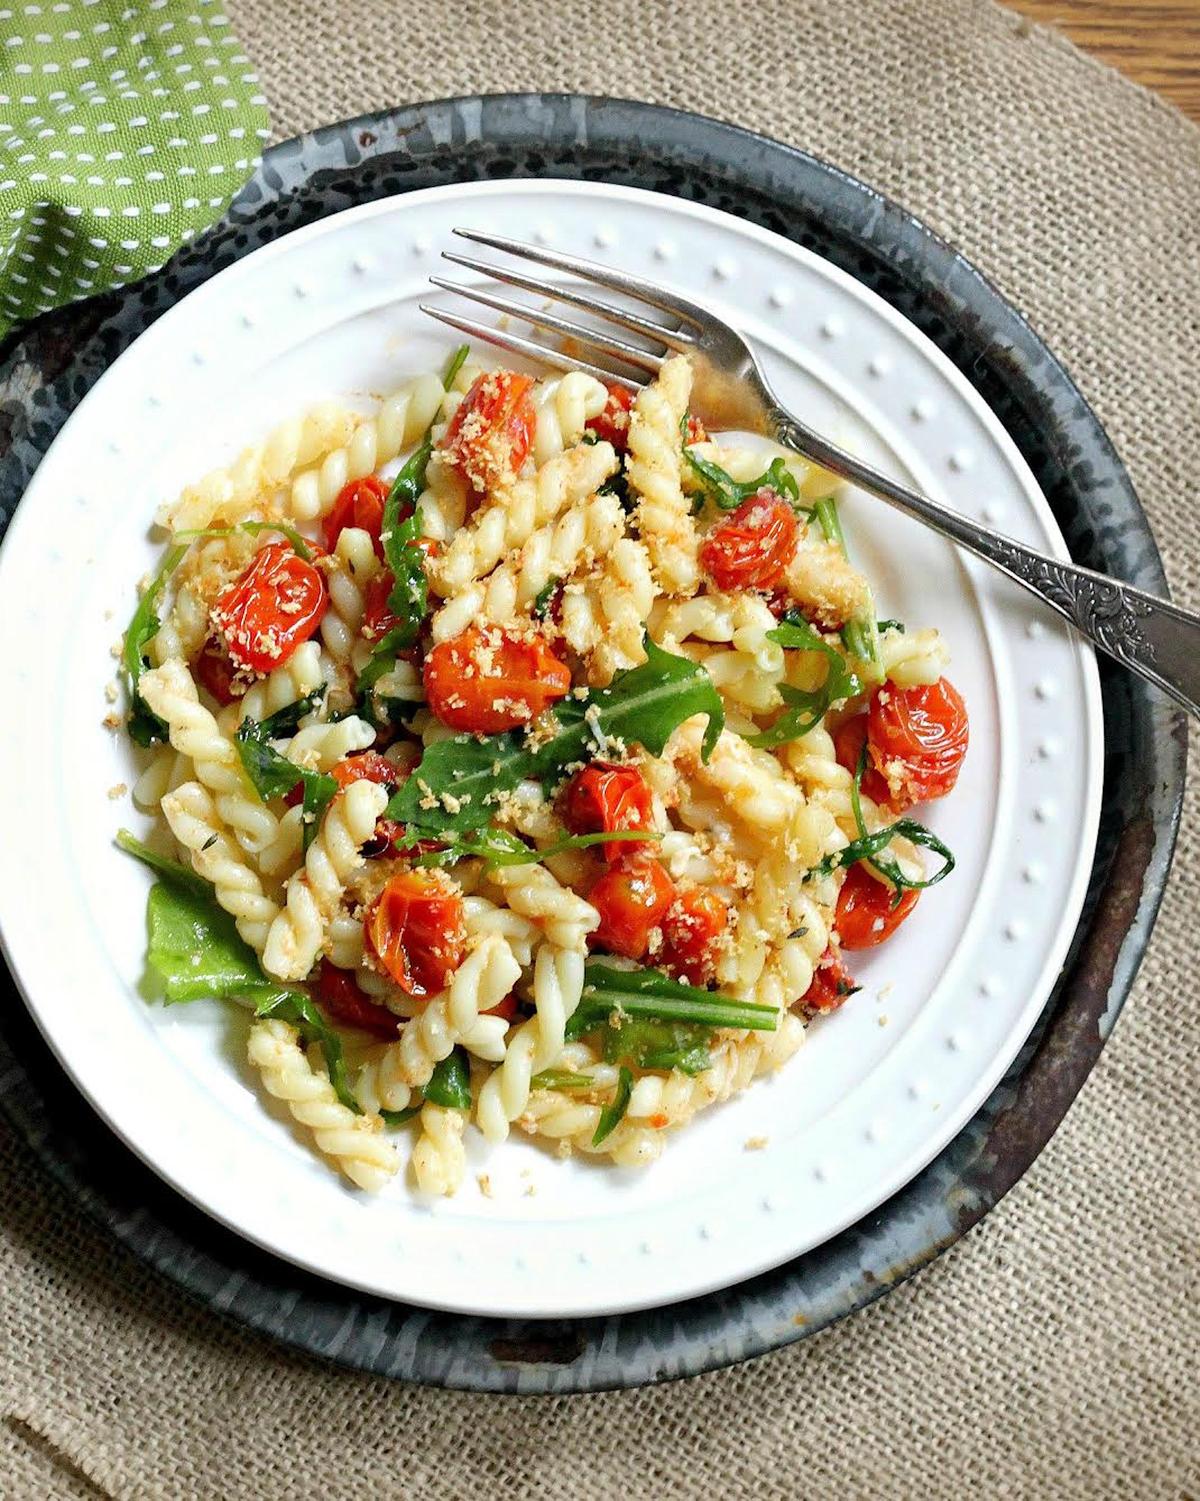 Cheesy toasted breadcrumbs instantly elevate this weeknight pasta. (Lynda Balslev for Tastefood)